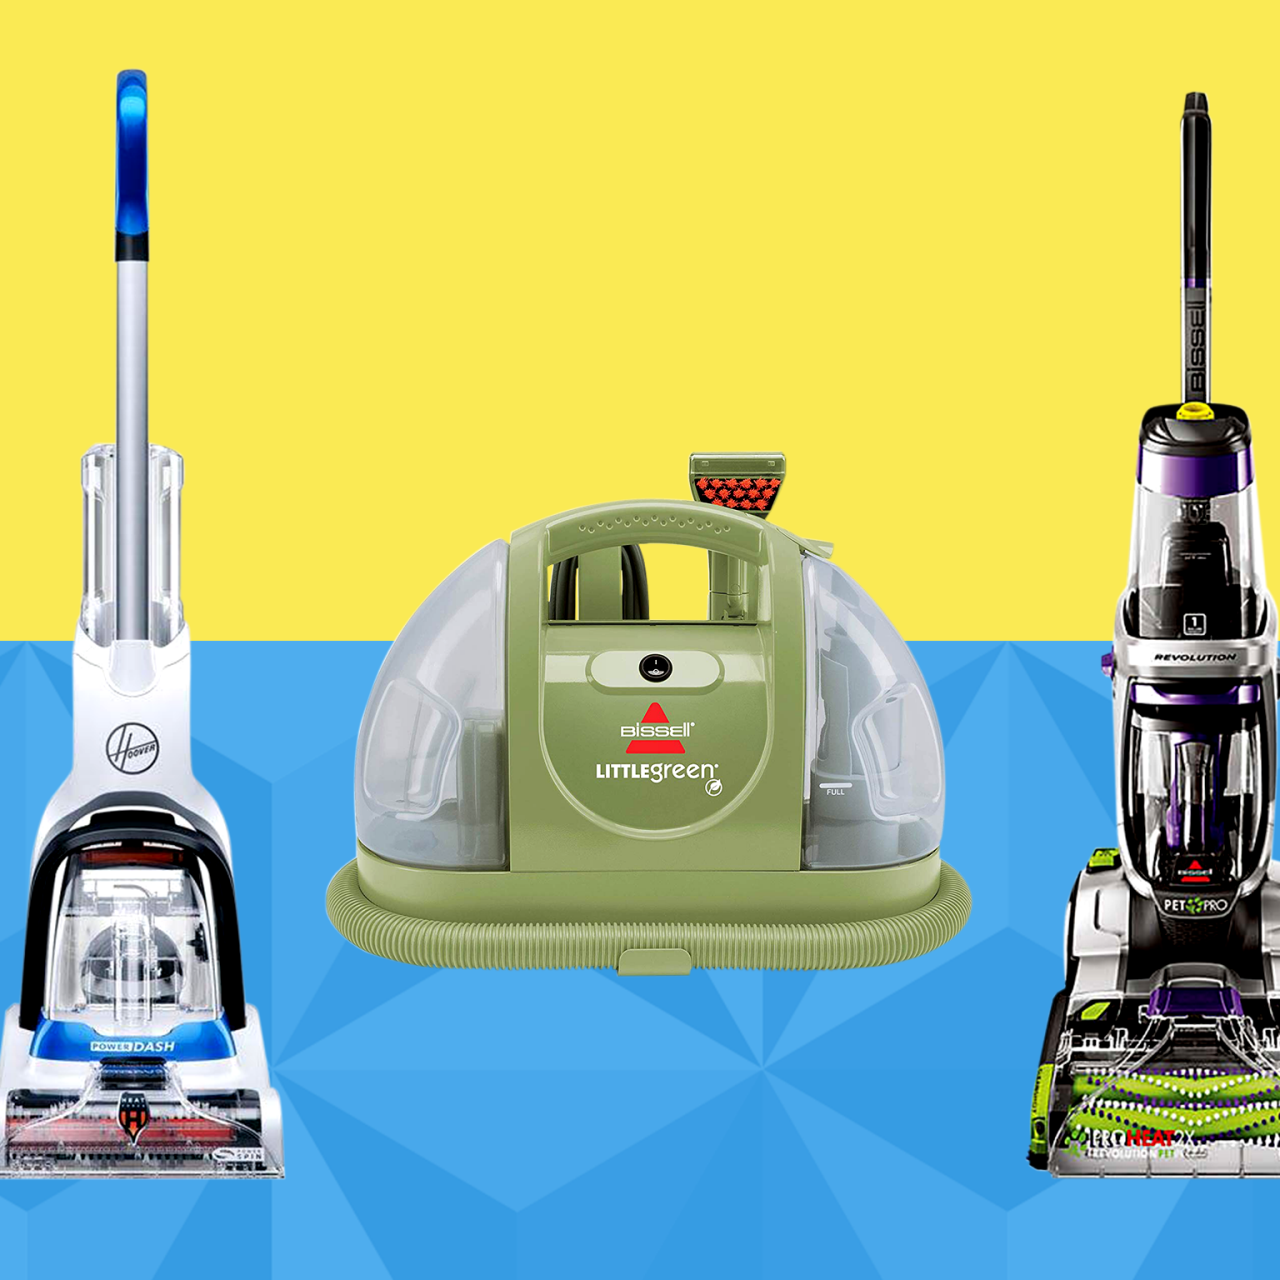 5 Best Carpet Cleaners in 2023, Best Carpet Cleaning Machines